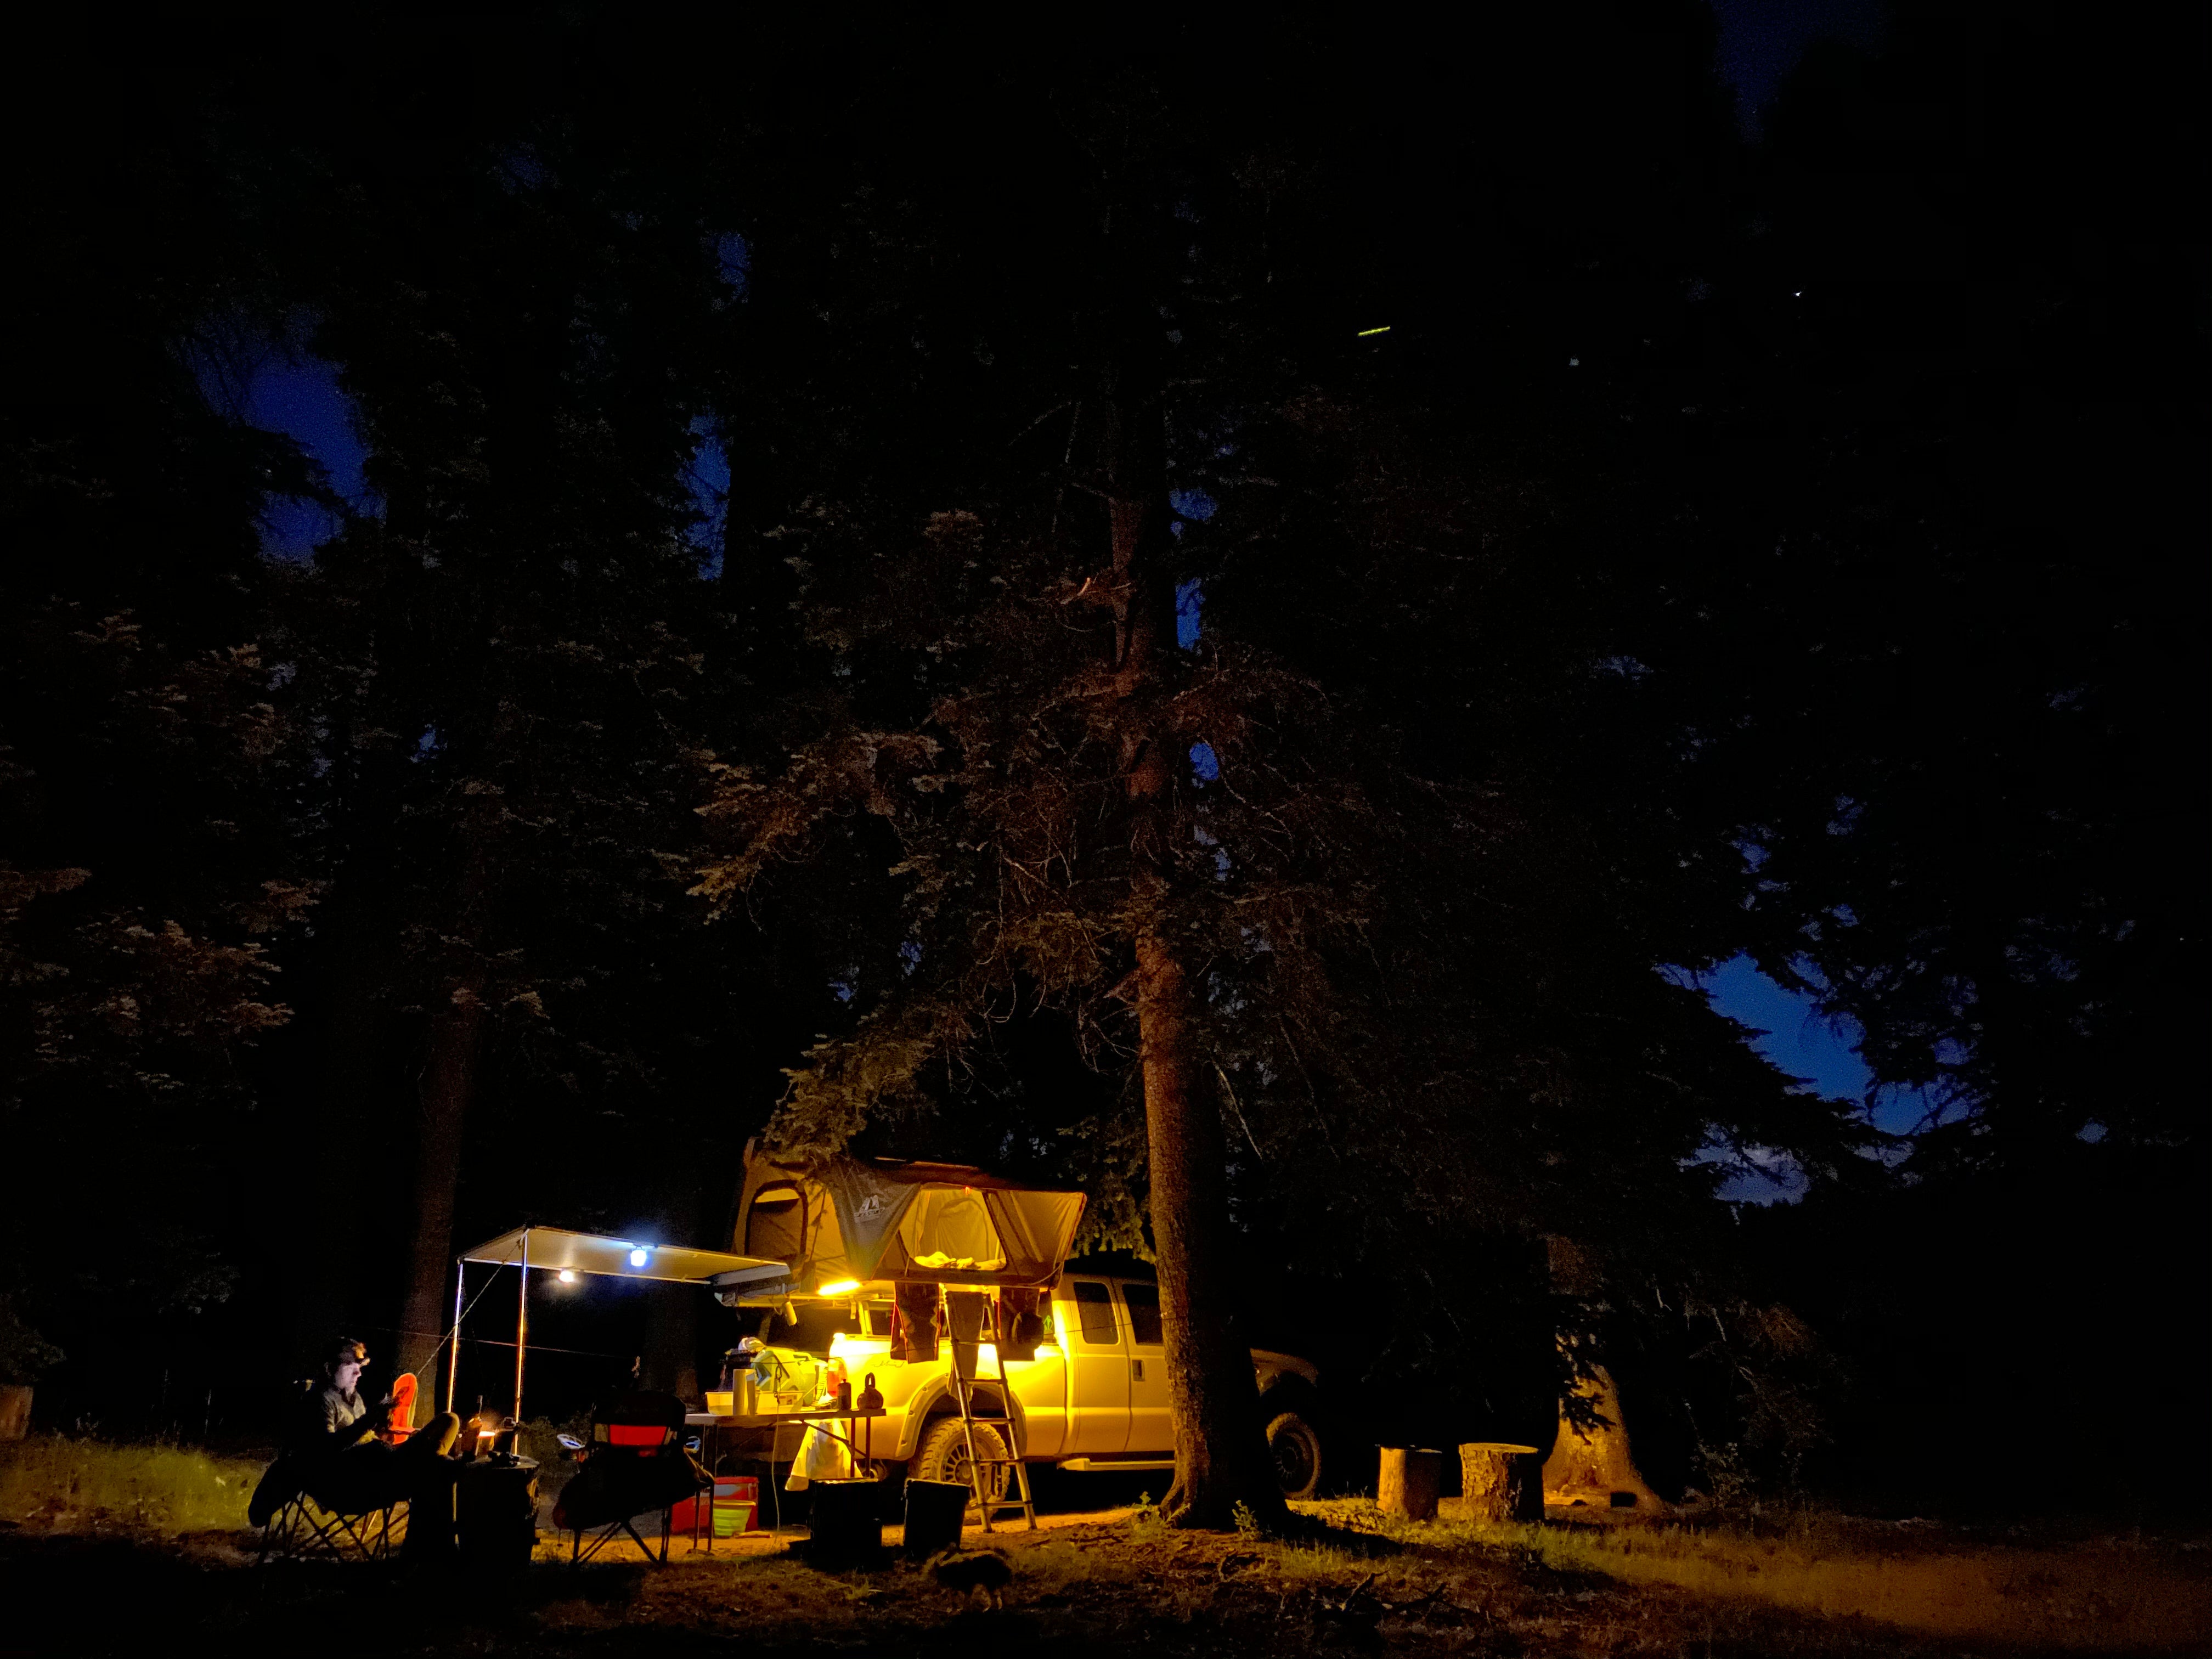 Camper submitted image from KP Cienega Campground - 1